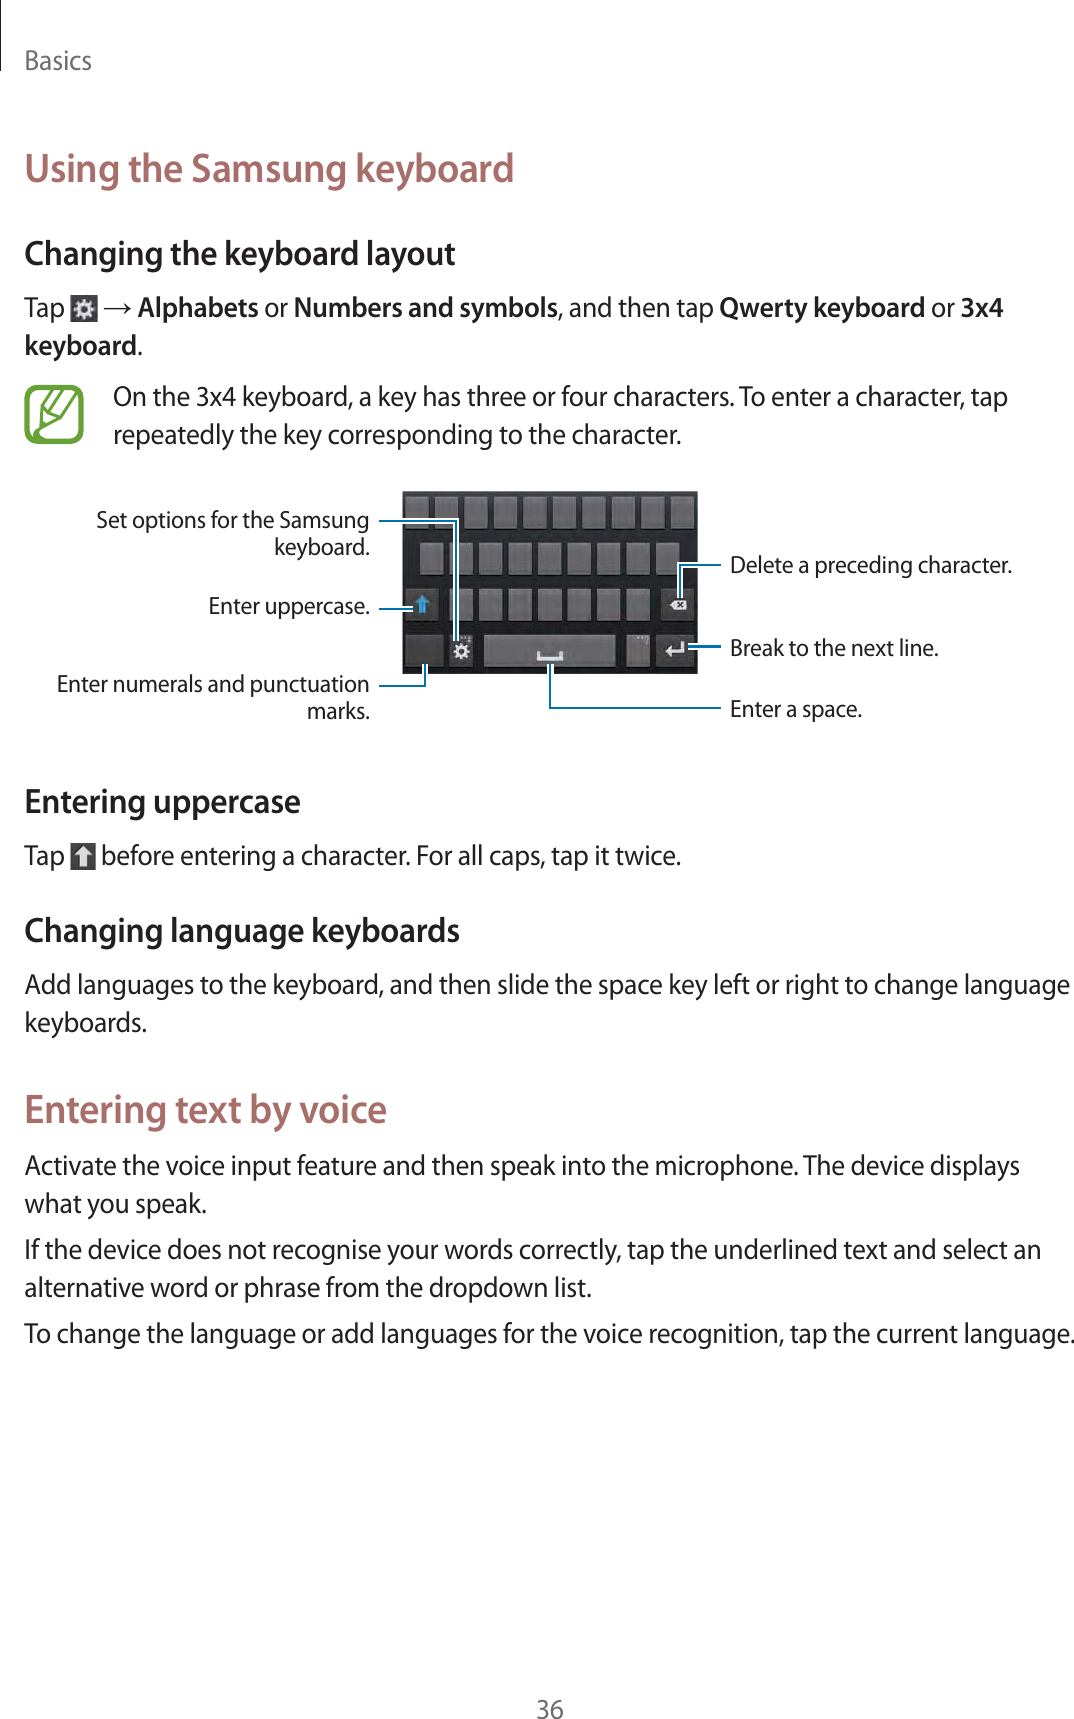 Basics36Using the Samsung keyboardChanging the keyboard layoutTap   ĺ Alphabets or Numbers and symbols, and then tap Qwerty keyboard or 3x4 keyboard.On the 3x4 keyboard, a key has three or four characters. To enter a character, tap repeatedly the key corresponding to the character.Break to the next line.Delete a preceding character.Enter numerals and punctuation marks.Enter uppercase.Set options for the Samsung keyboard.Enter a space.Entering uppercaseTap   before entering a character. For all caps, tap it twice.Changing language keyboardsAdd languages to the keyboard, and then slide the space key left or right to change language keyboards.Entering text by voiceActivate the voice input feature and then speak into the microphone. The device displays what you speak.If the device does not recognise your words correctly, tap the underlined text and select an alternative word or phrase from the dropdown list.To change the language or add languages for the voice recognition, tap the current language.